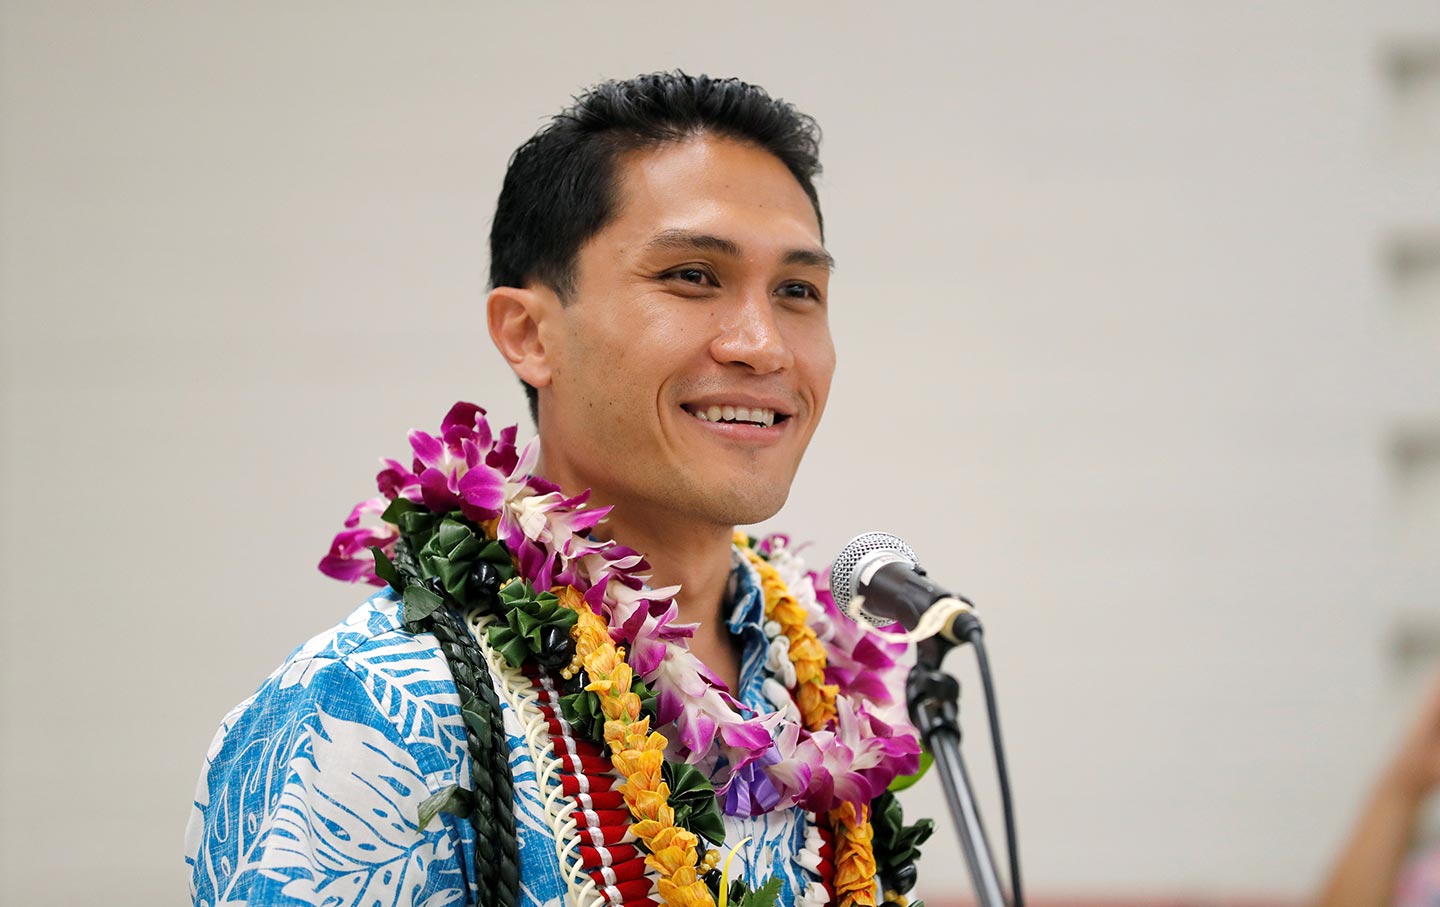 Kaniela Ing Candidate in the Democratic Primaries in Hawai